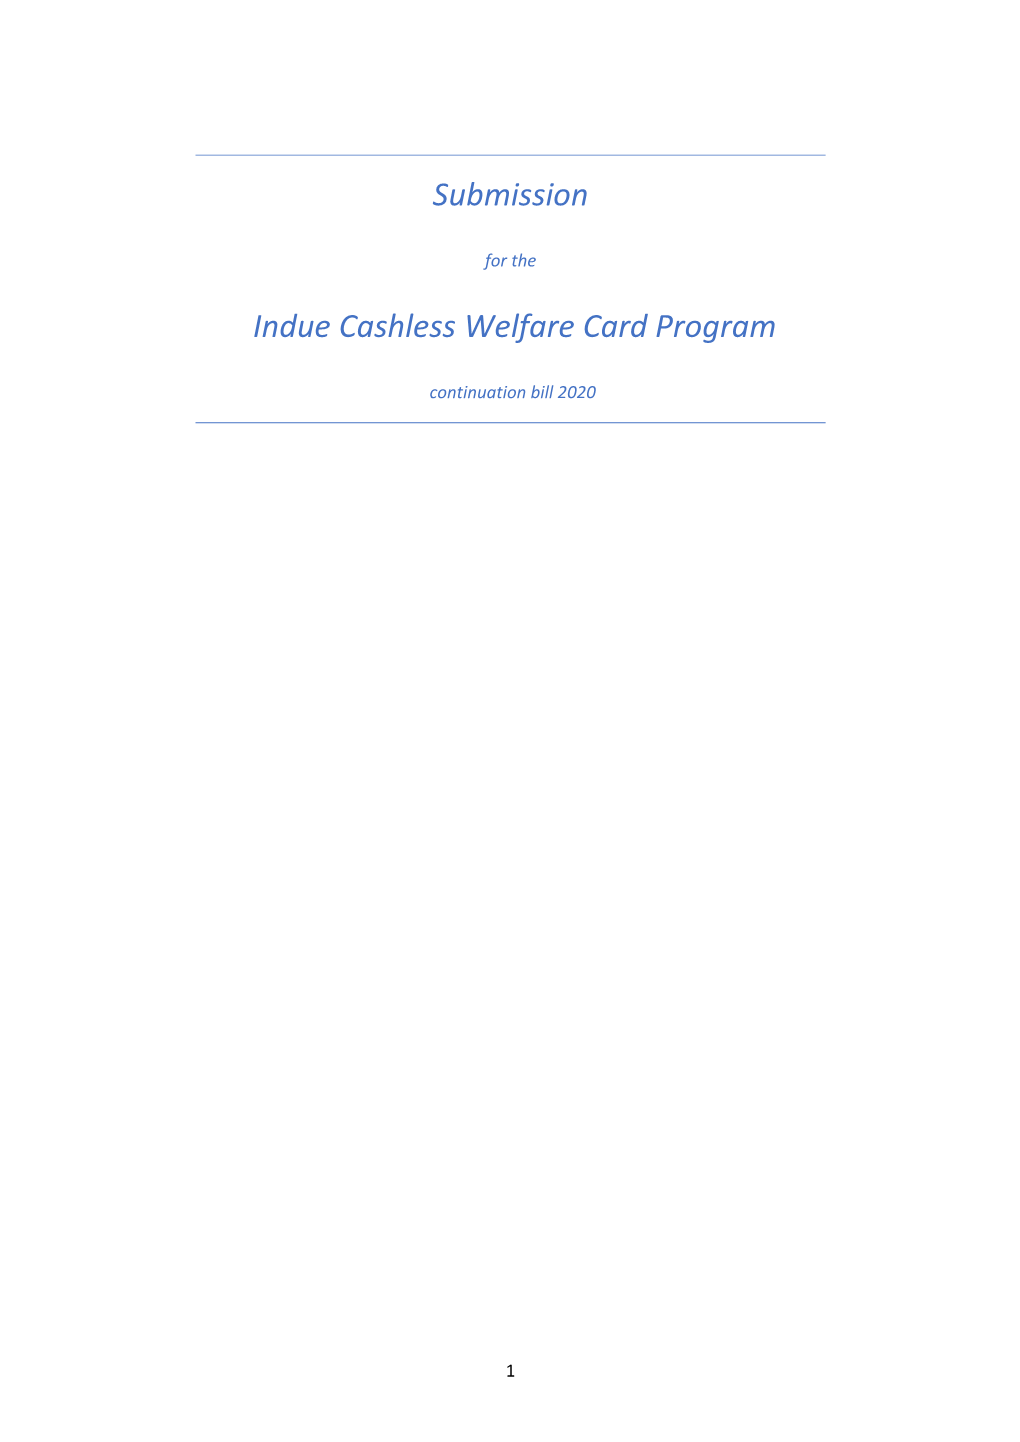 Submission Indue Cashless Welfare Card Program